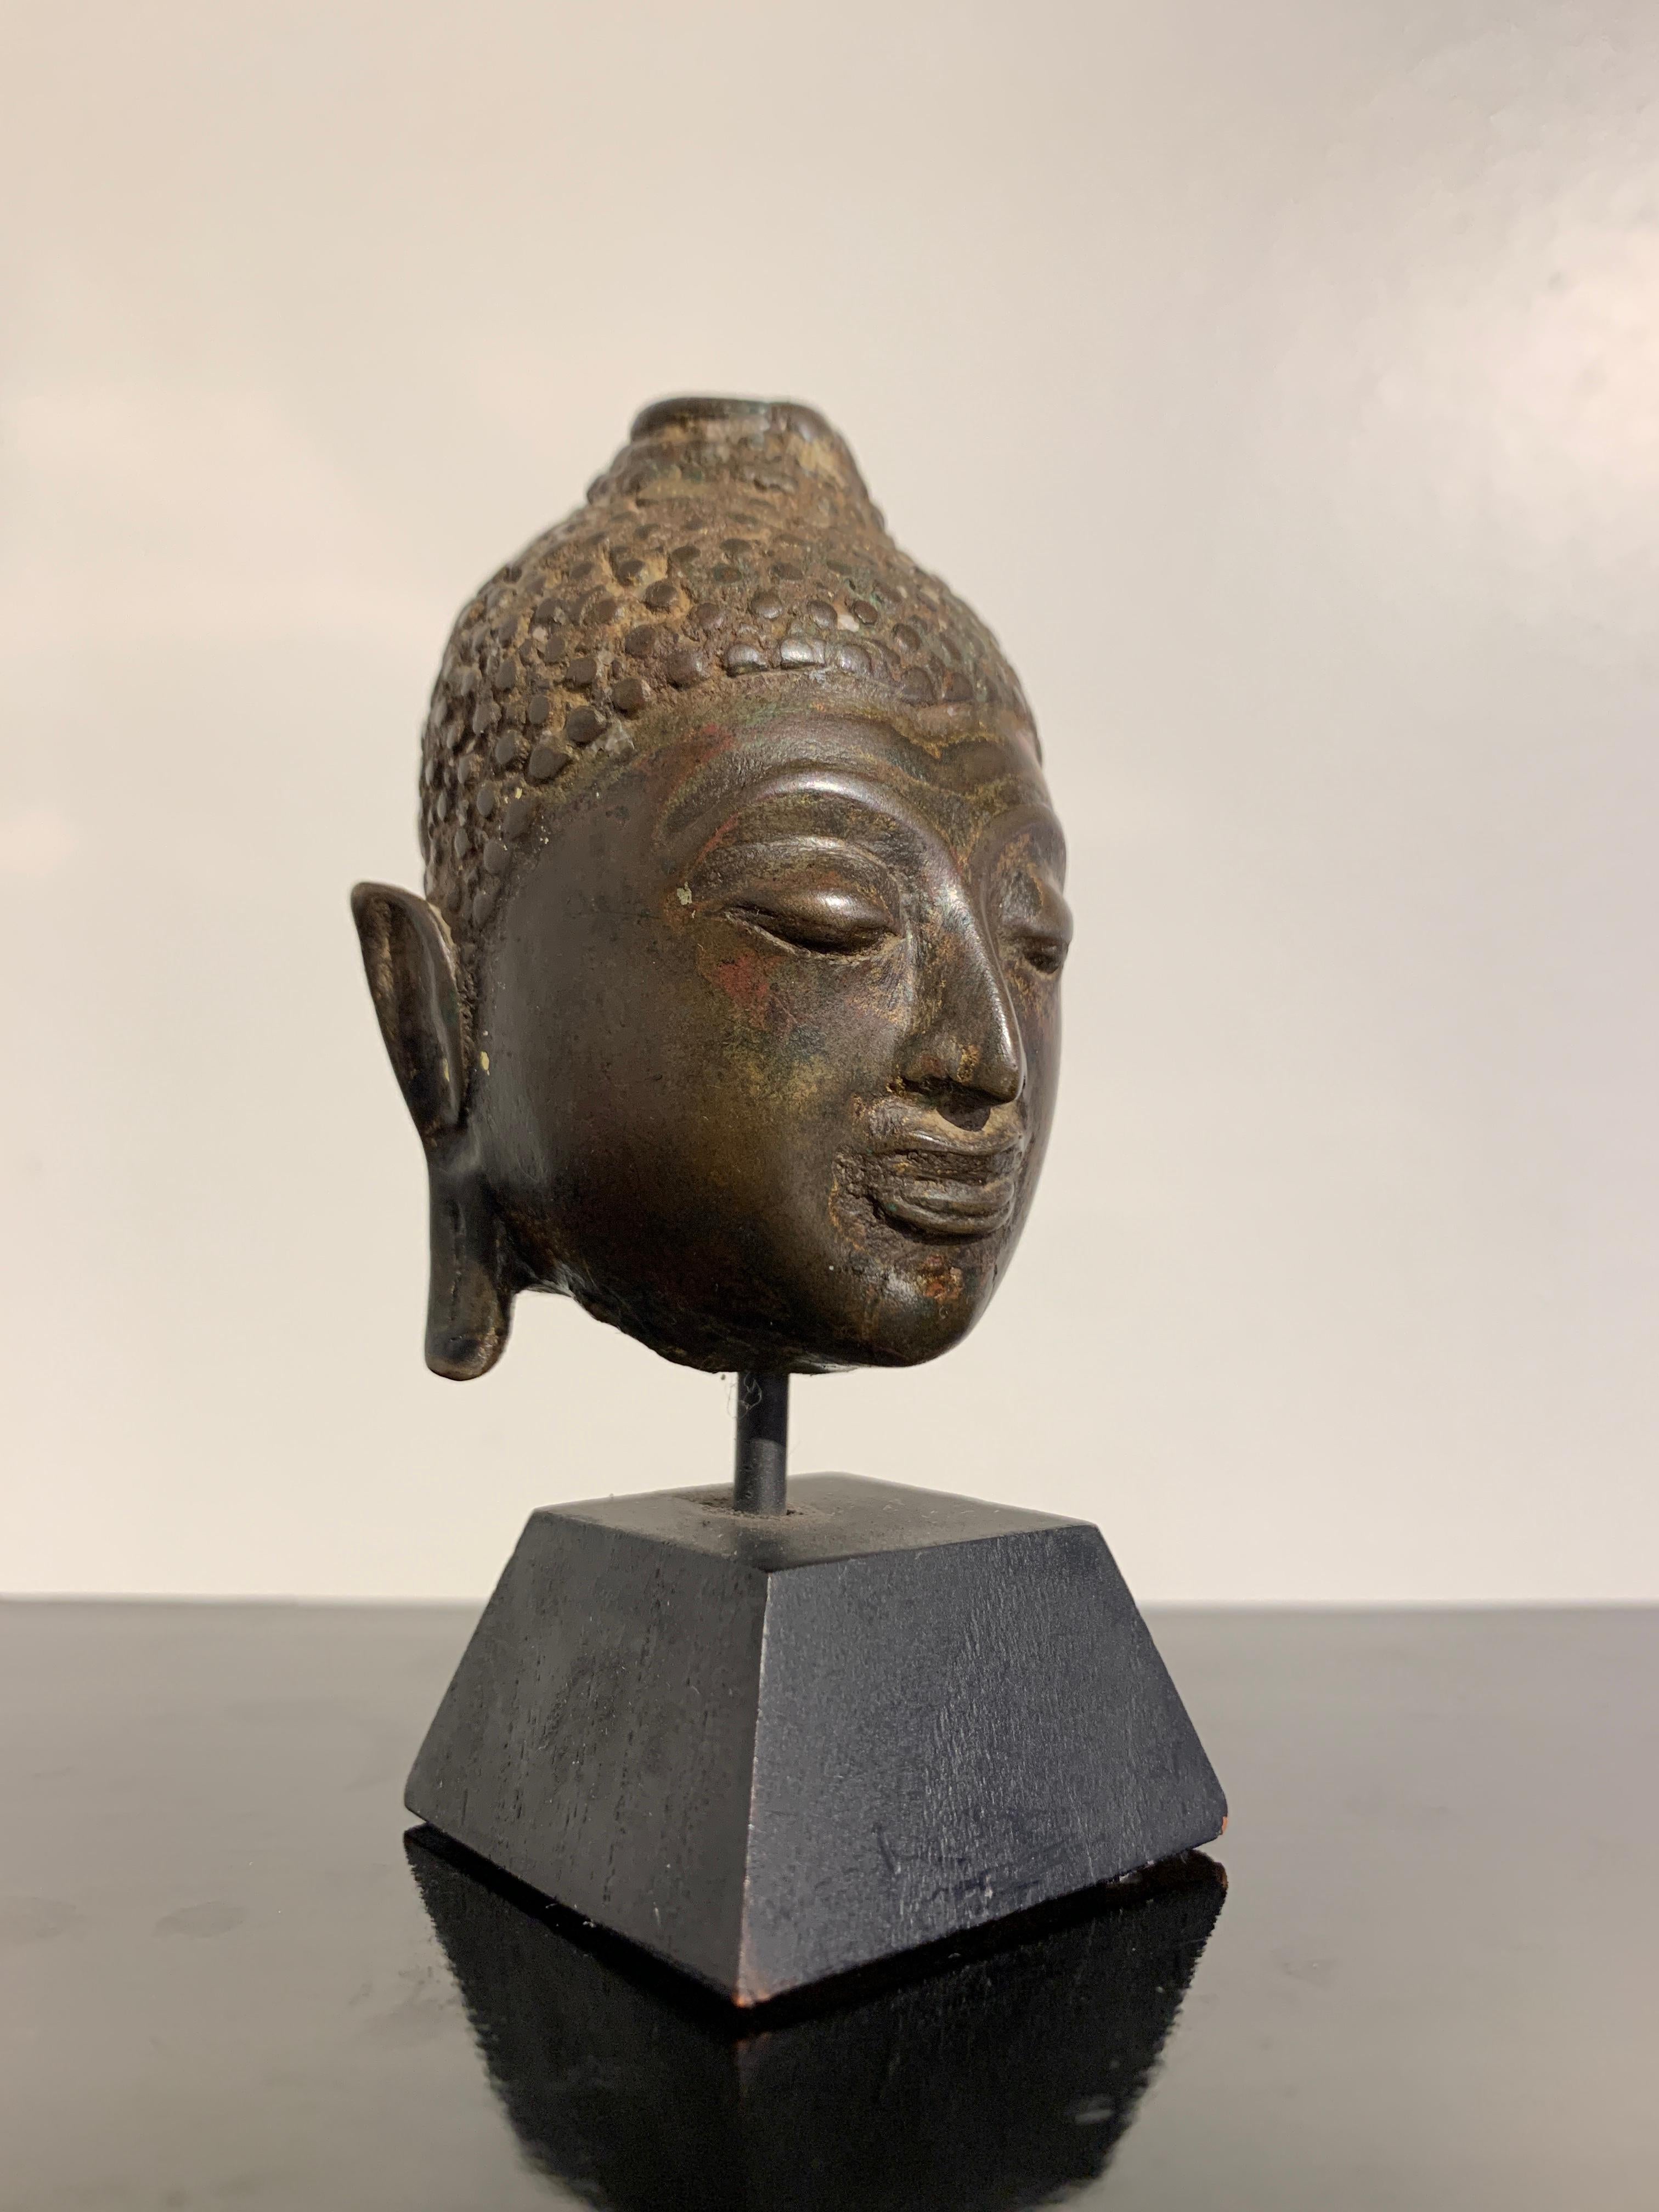 A small and charming fragmentary cast bronze Buddha head with traces of gilding and lacquer, Lan Na Kingdom, Chiang Saen style, 16th century, Thailand.

The small head of the Buddha from the ancient kingdom of Lan Na, with typical Chiang Saen